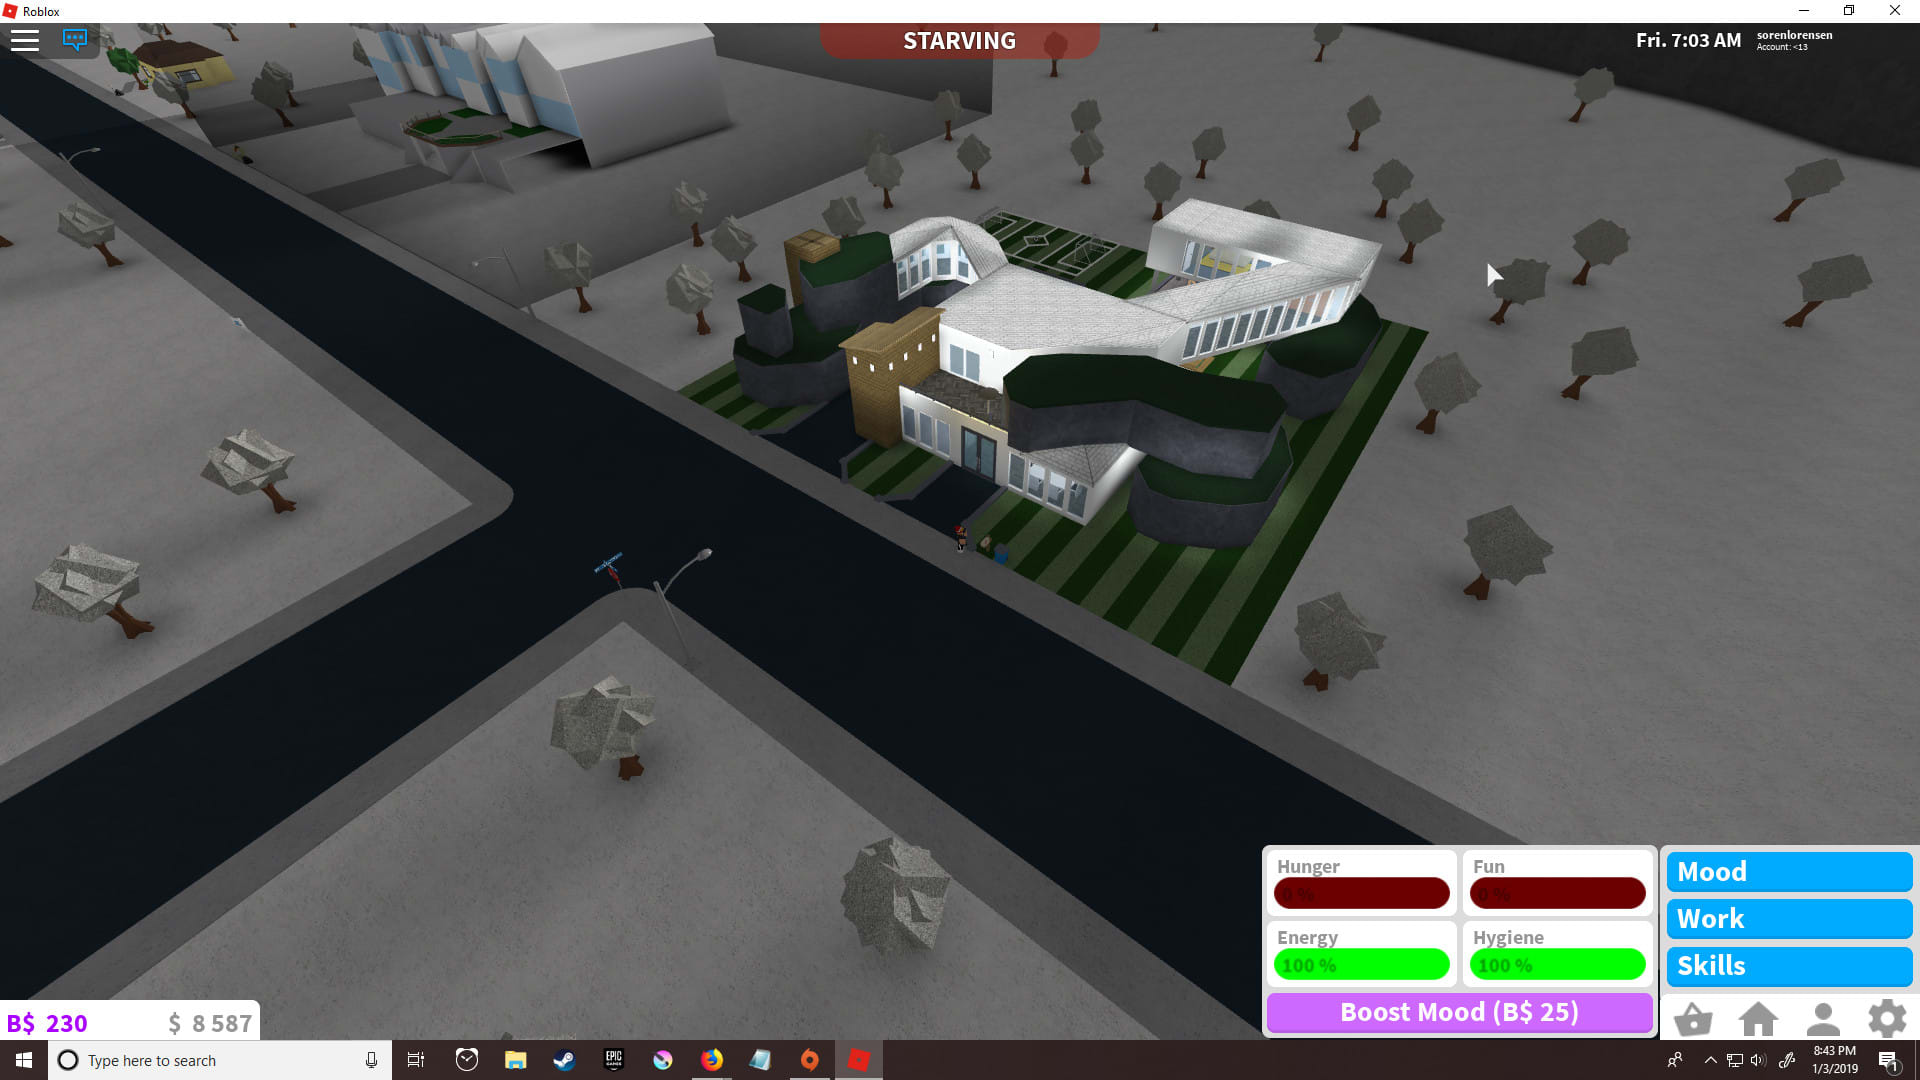 Play Roblox With You Or Build A House In Bloxburg By Sorenlorensen - 230 roblox